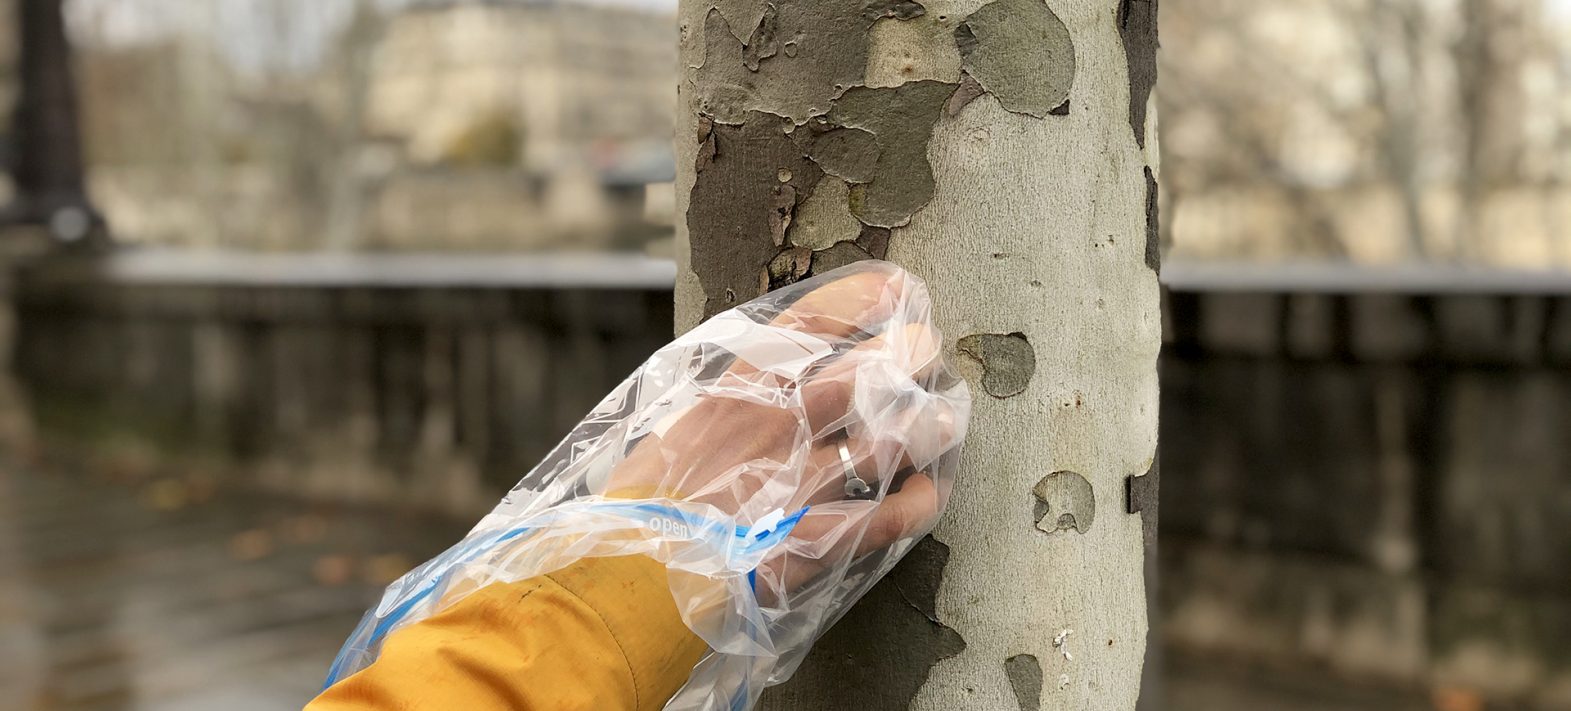 Ecorc’Air, the urban pollution measured in the bark of plane trees